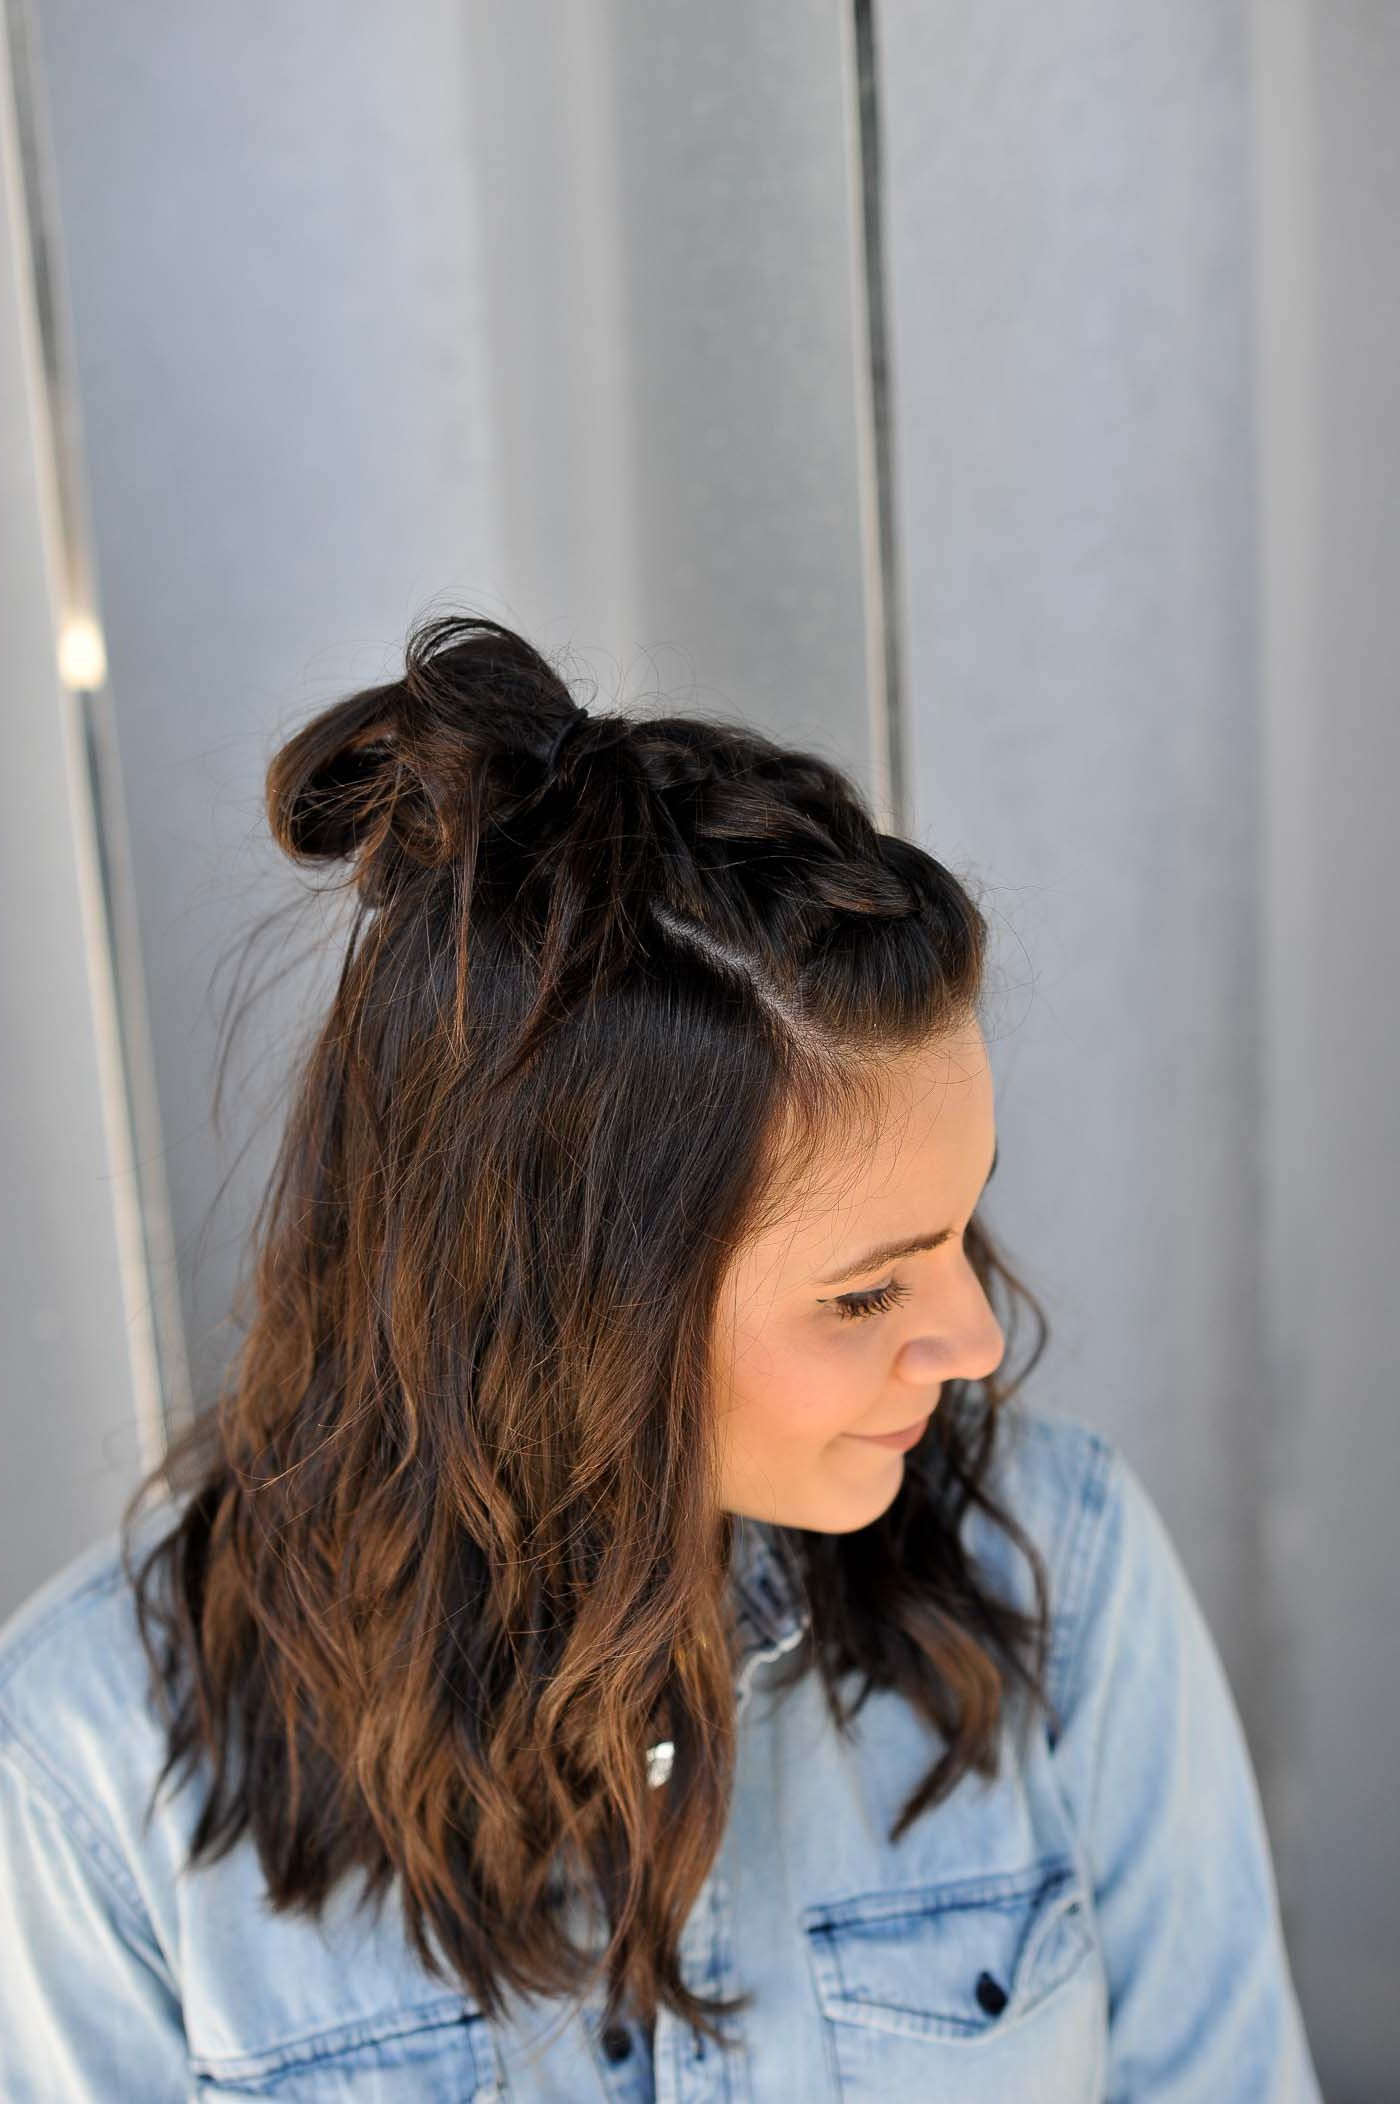 My Style Vita In Most Recent Half Up Top Knot Braid Hairstyles (View 4 of 20)